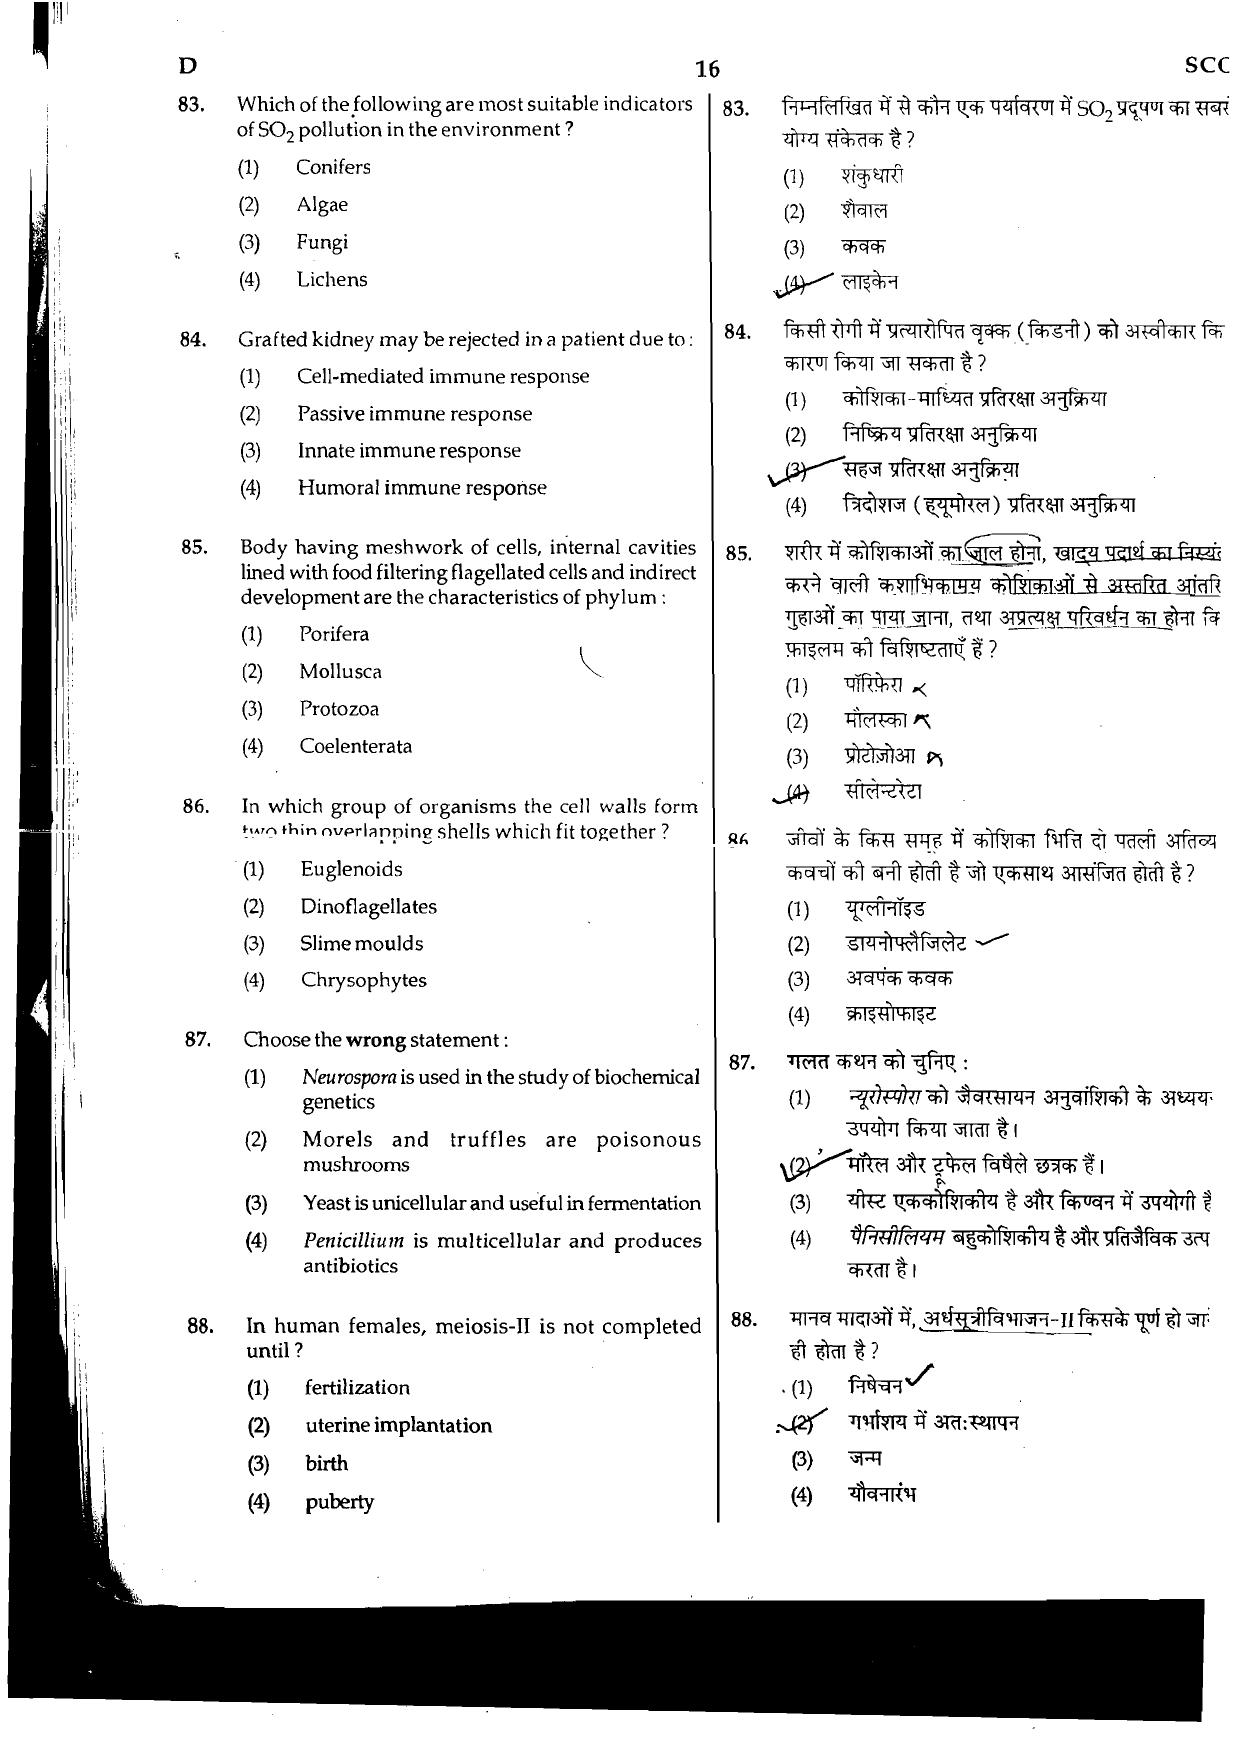 NEET Code D 2015 Question Paper - Page 16